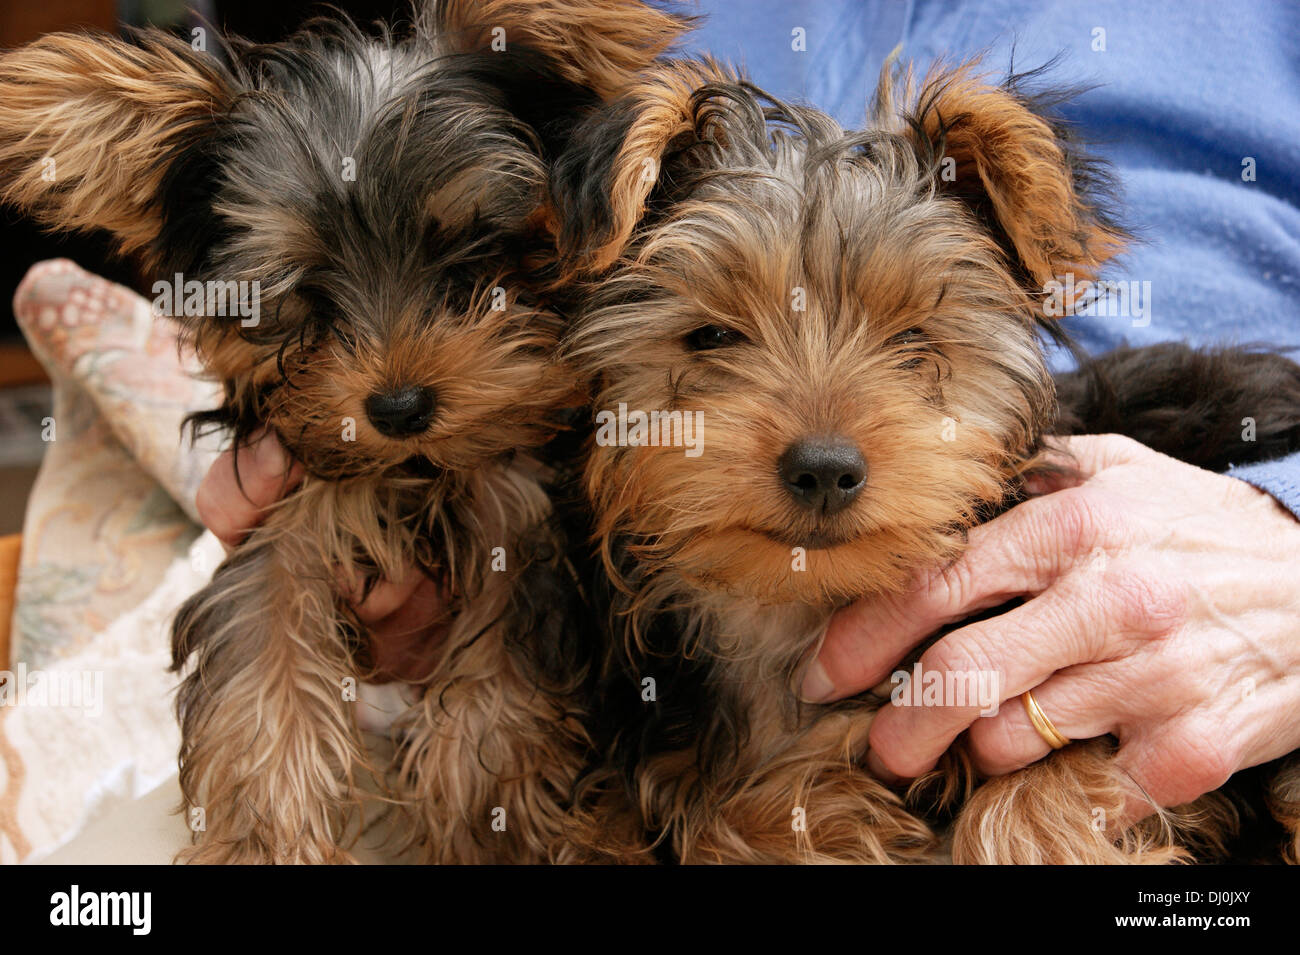 Cute yorkshire terrier puppies having a cuddle Stock Photo